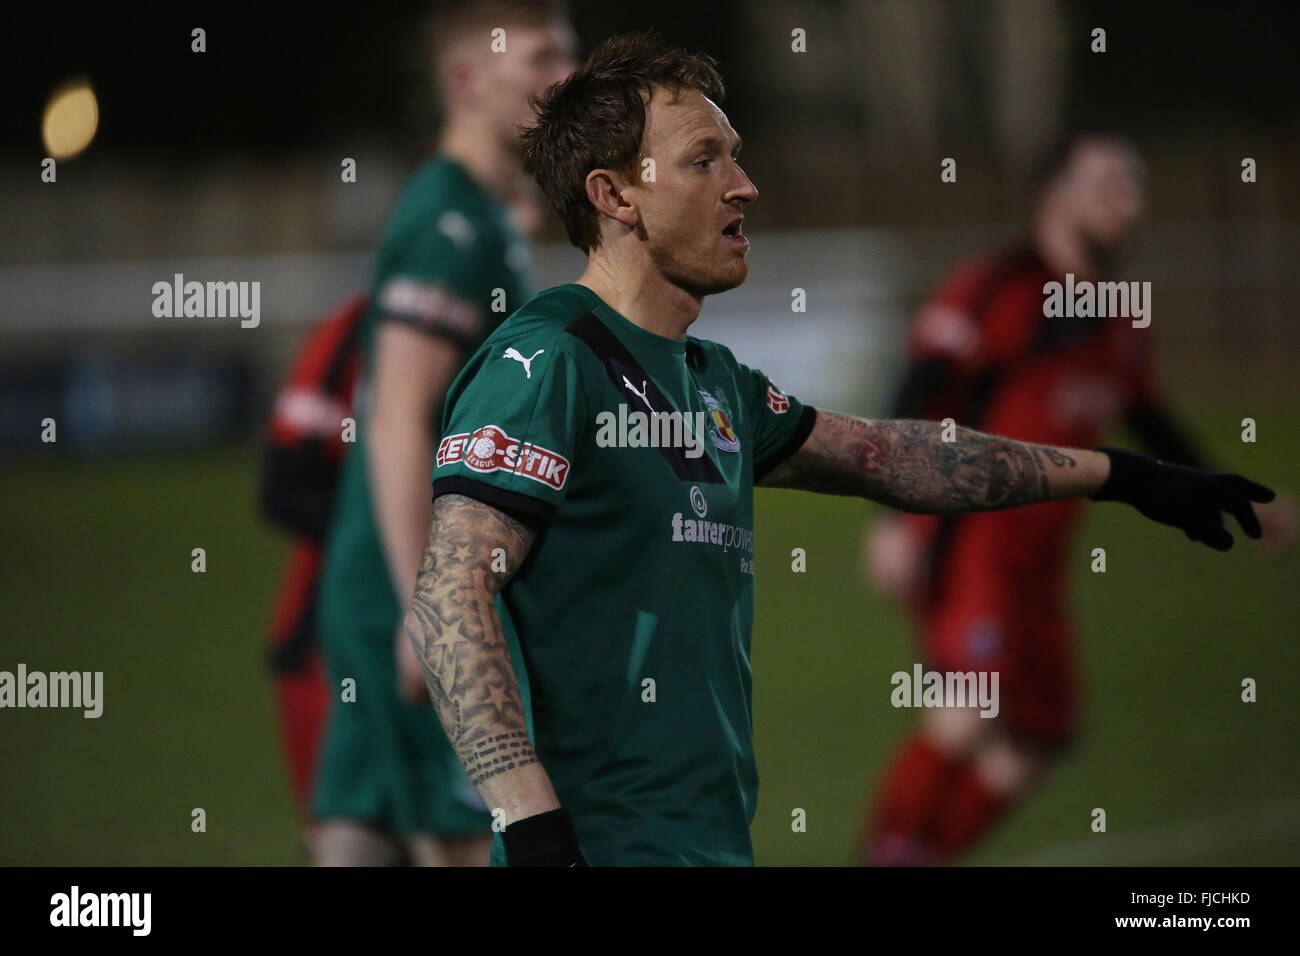 Nantwich, Cheshire, UK. 1st March, 2016. Nantwich Town's Steve Jones during the Integro Doodson Sports Cup match between Nantwich Town and Bamber Bridge. Credit:  Simon Newbury/Alamy Live News Stock Photo